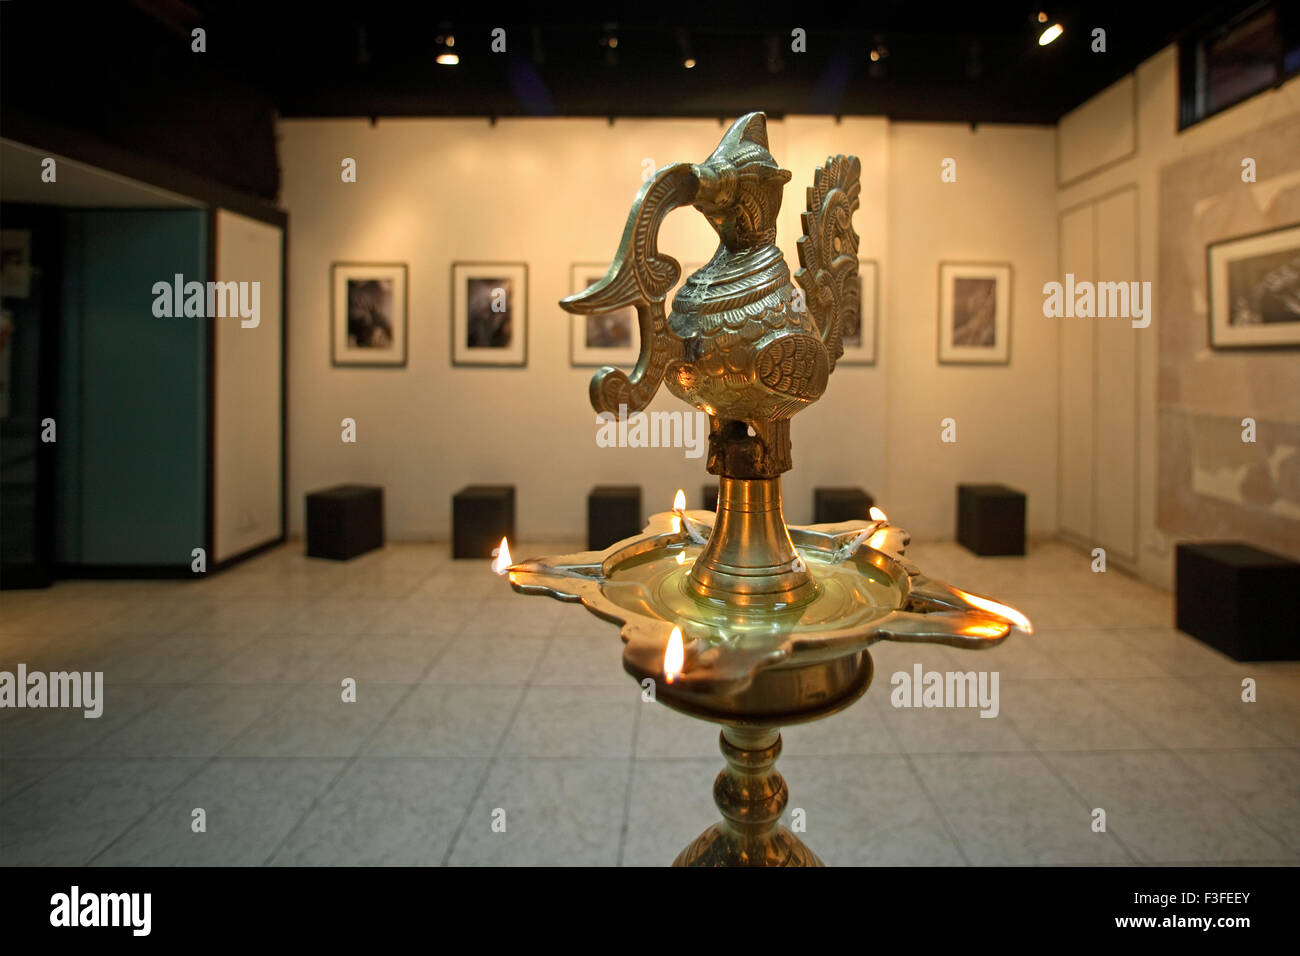 Brass Lamp ; exhibition opening lighting lamp ; New Delhi ; India ; Asia ; Asian ; Indian Stock Photo